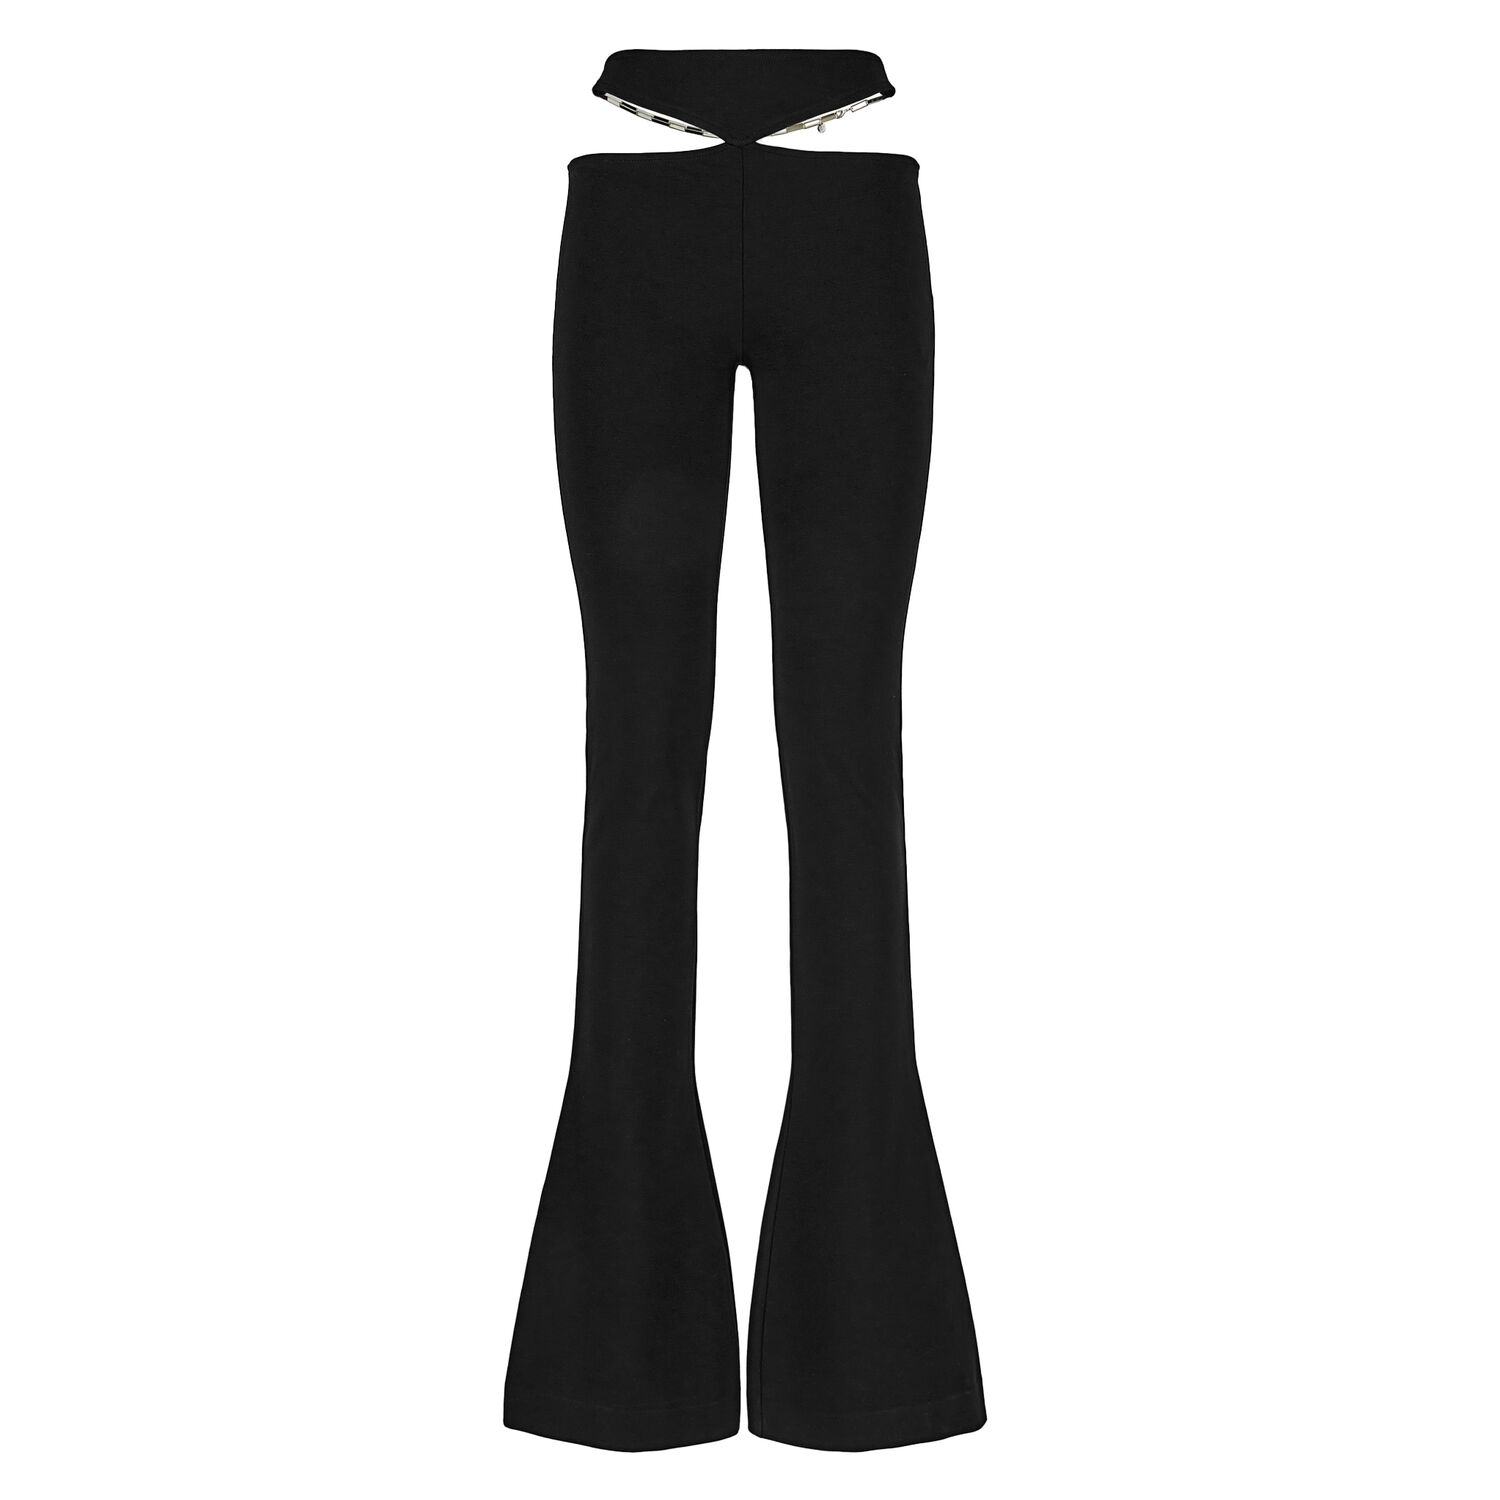  Other Stories slit front jersey kick flare pants in black